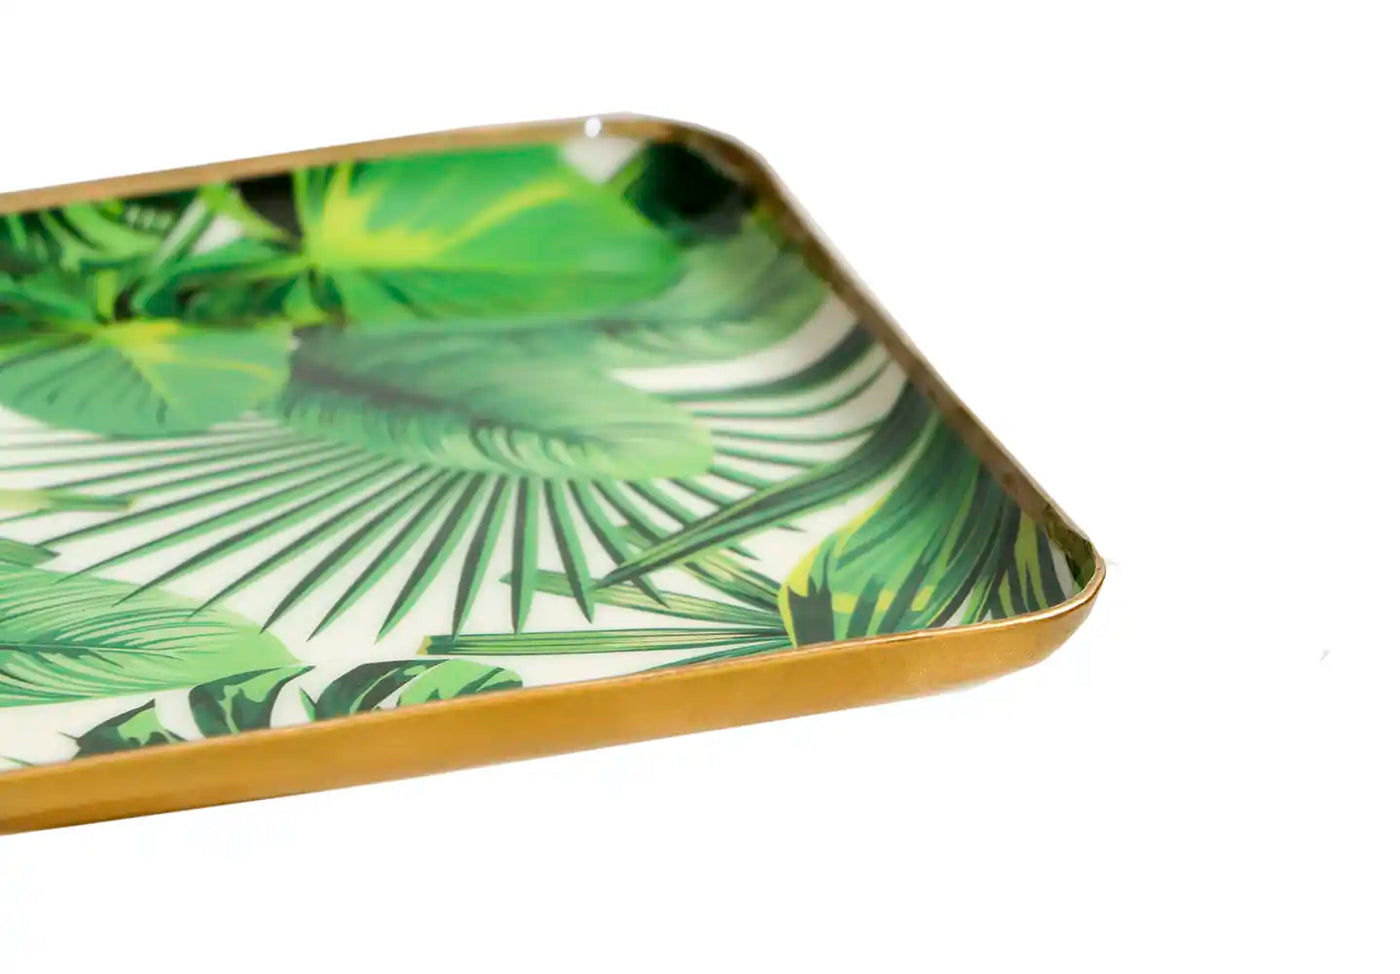 Square Tropical Paradise Palm Leaf Print Metal Plates - Set of 4 - Dining & Kitchen - 4